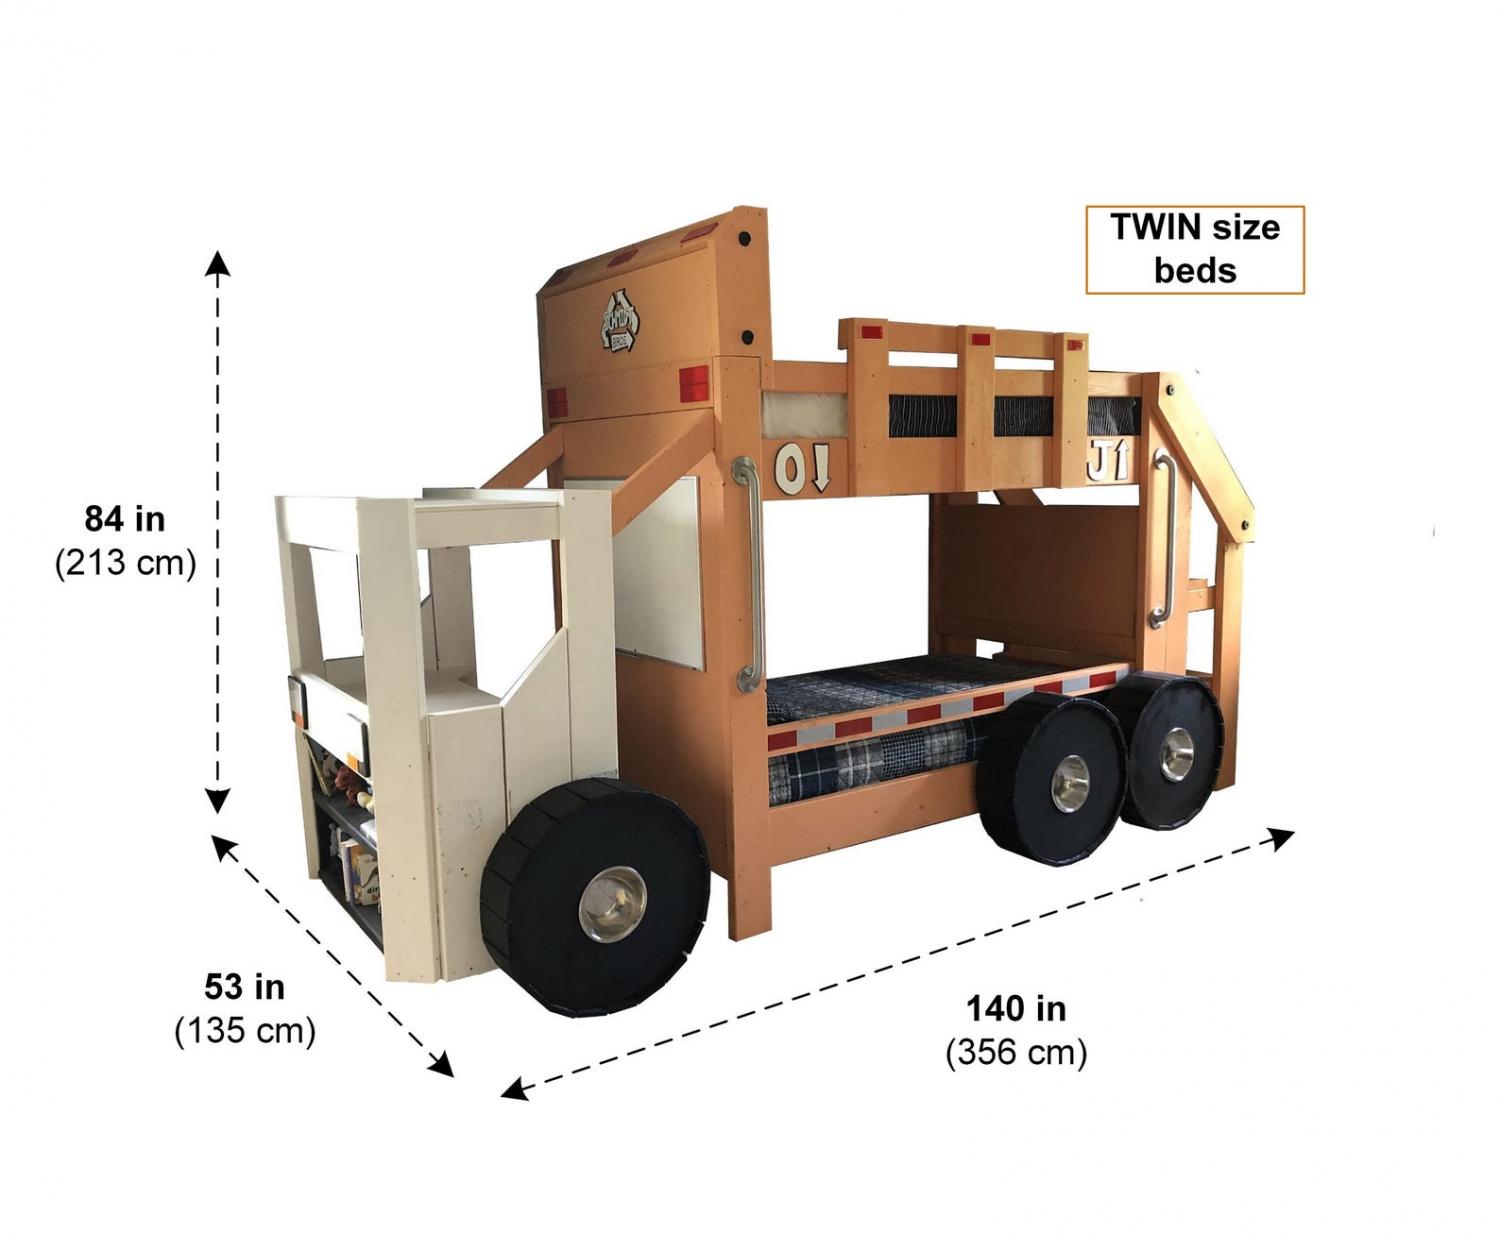 DIY Garbage Truck Bunk Bed - Garbage truck kids bed with desk and bookshelf